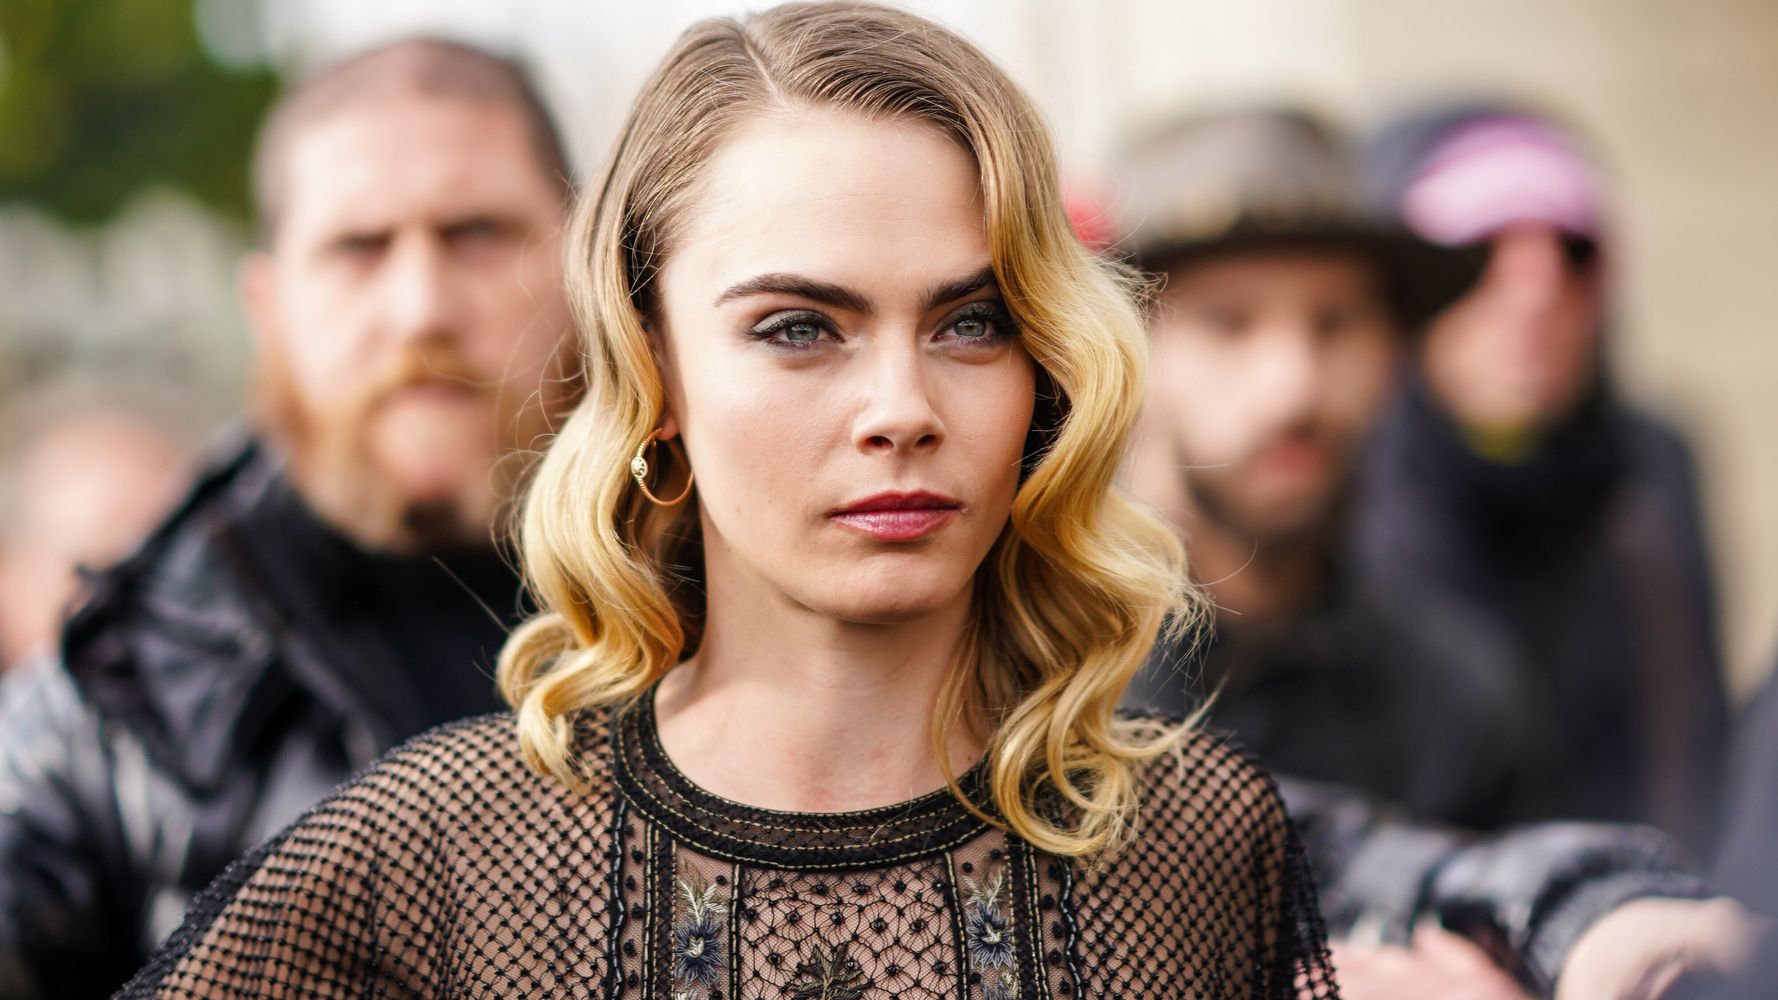 Cara Delevingne Defends Ex Ashley Benson Amid Rumours About